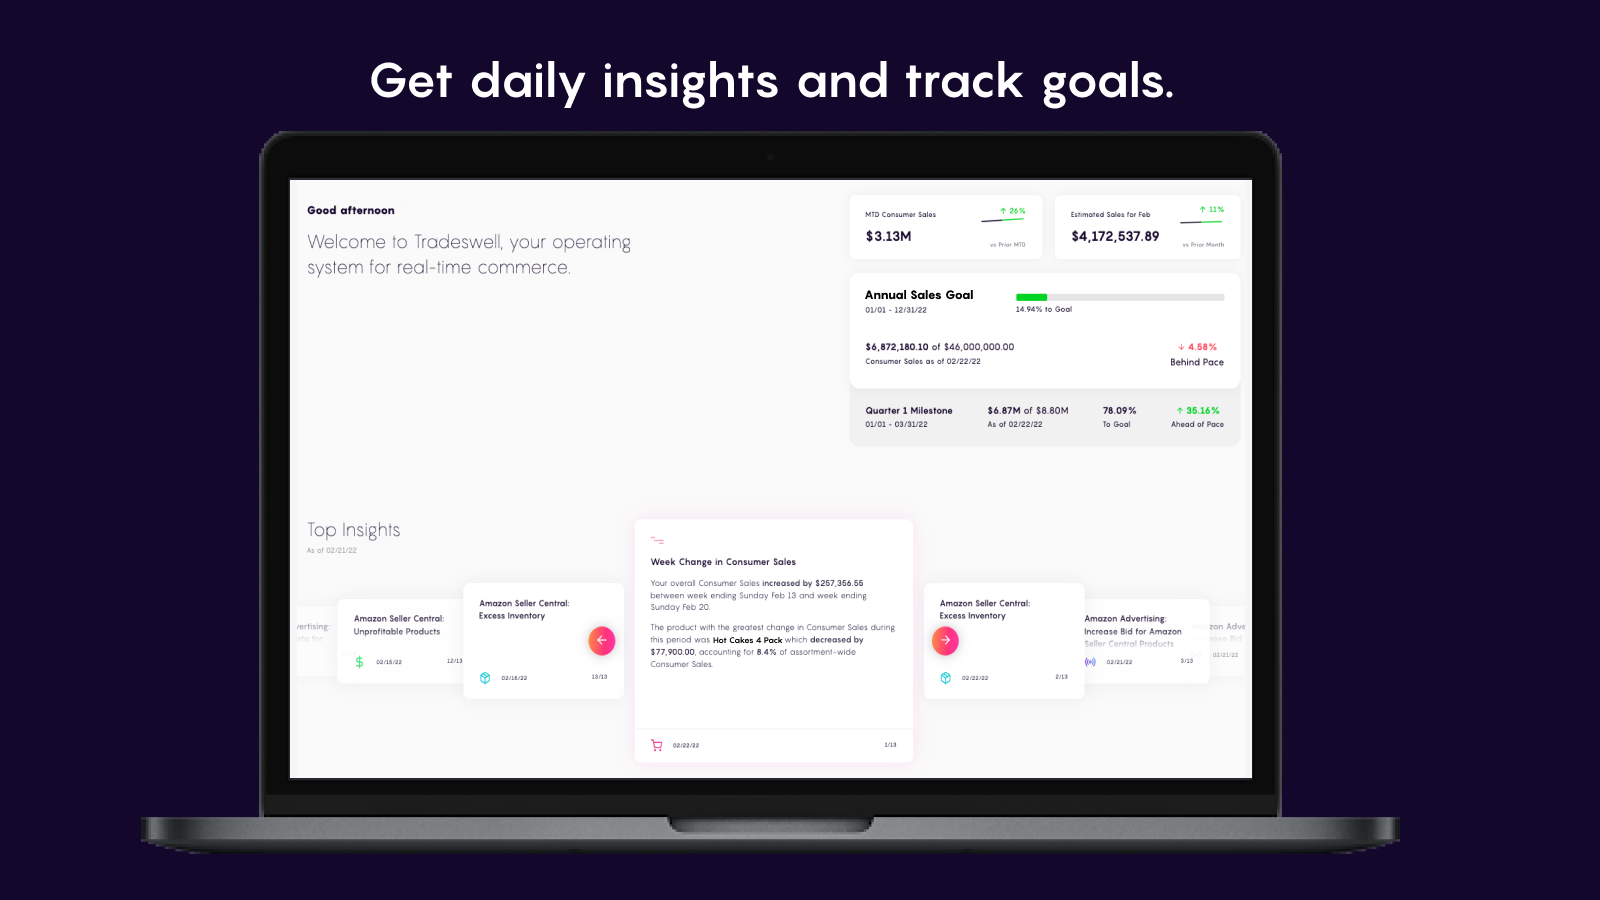 Daily goal management and insights at your fingertips.